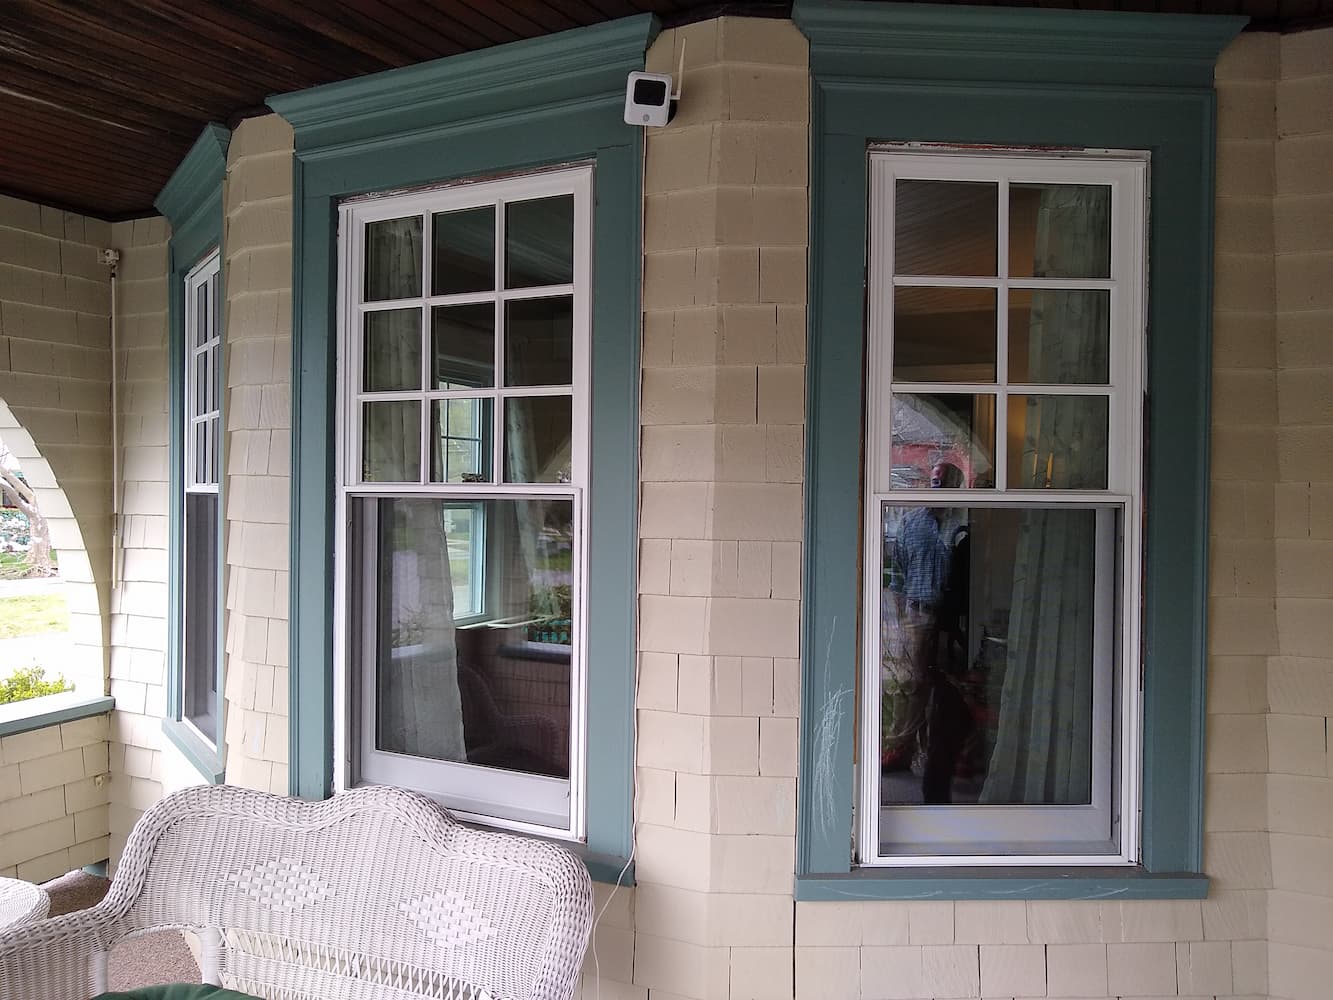 After view of exterior bay window